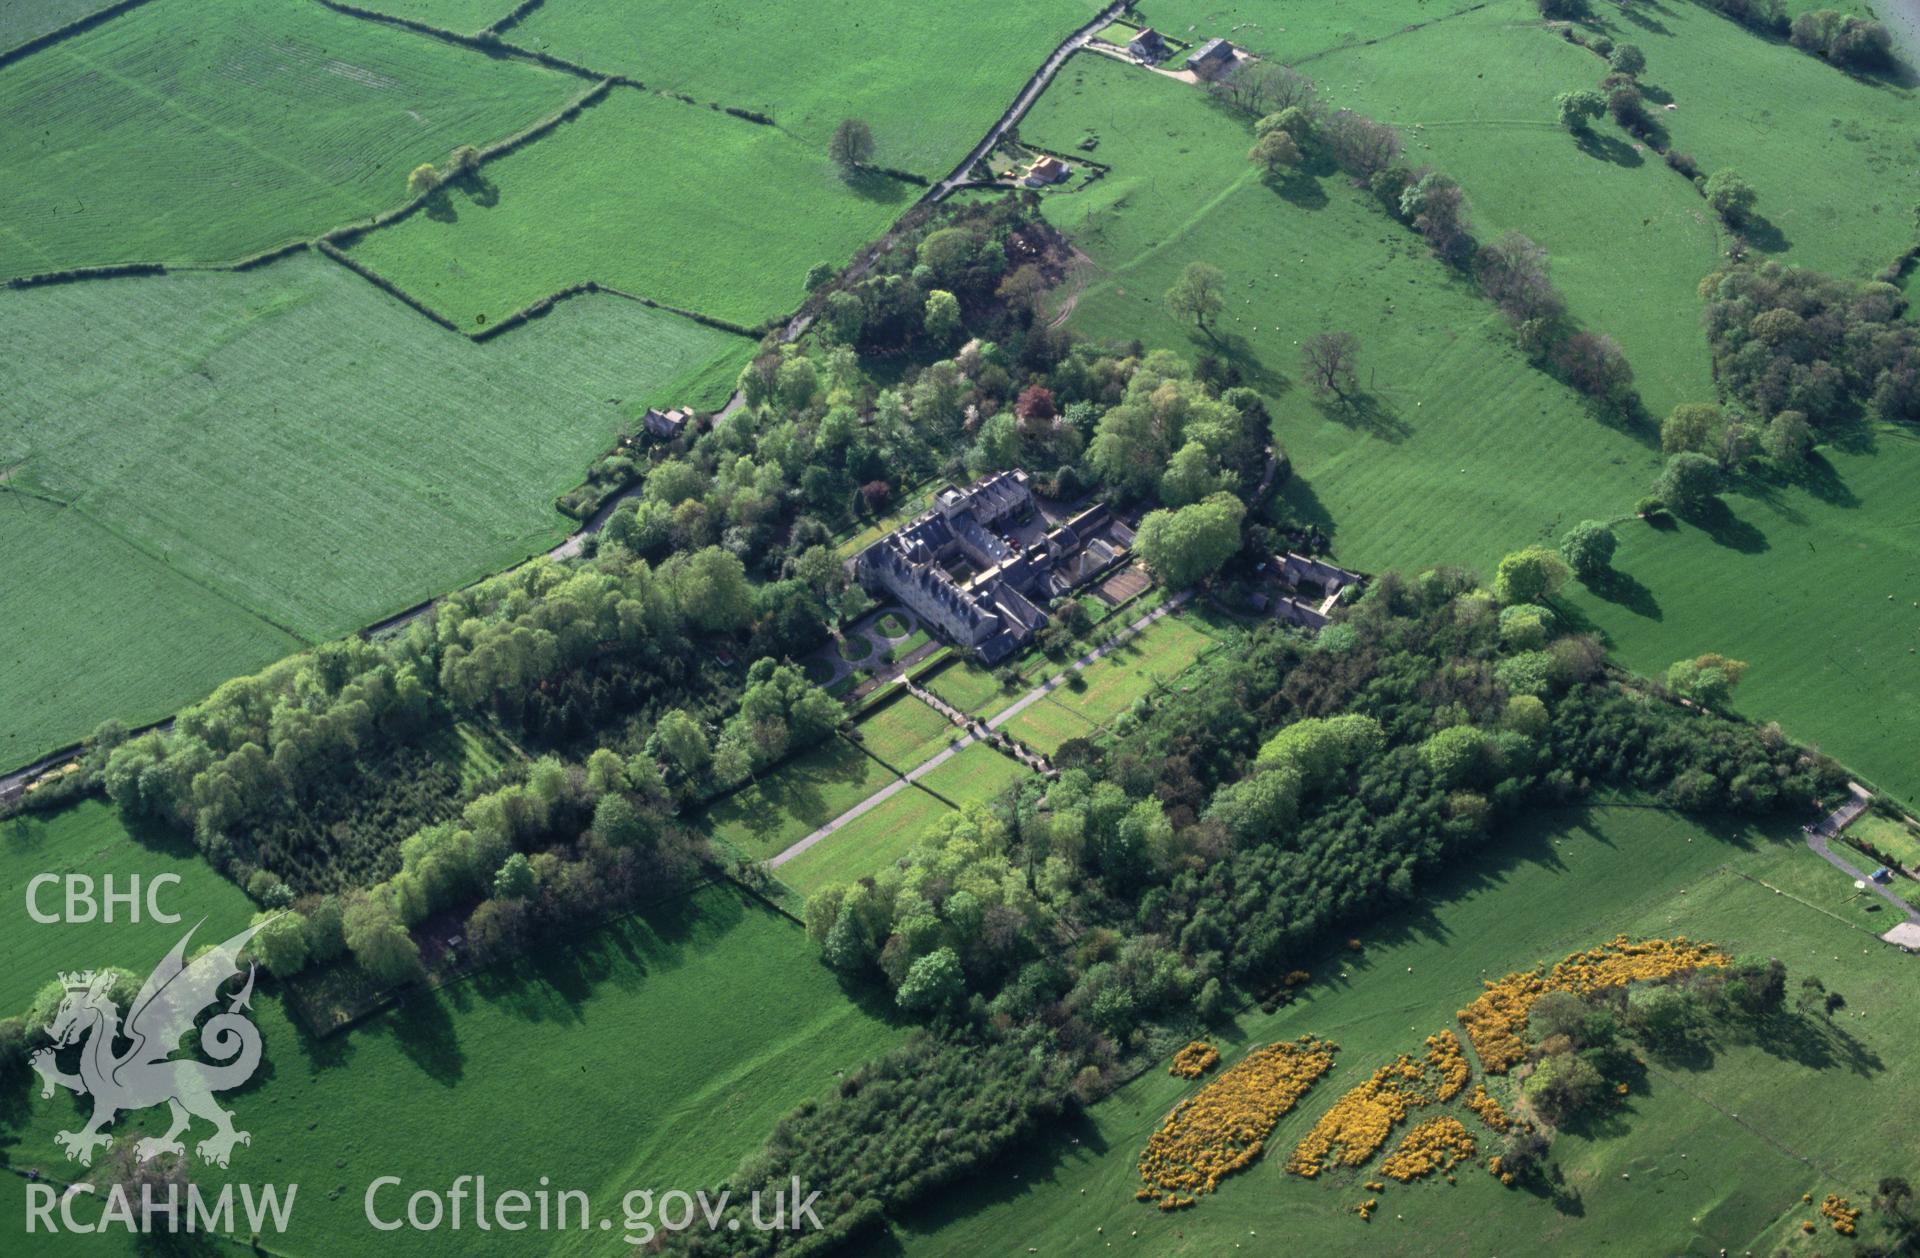 Slide of RCAHMW colour oblique aerial photograph of St Beuno's College, taken by C.R. Musson, 2/5/1993.